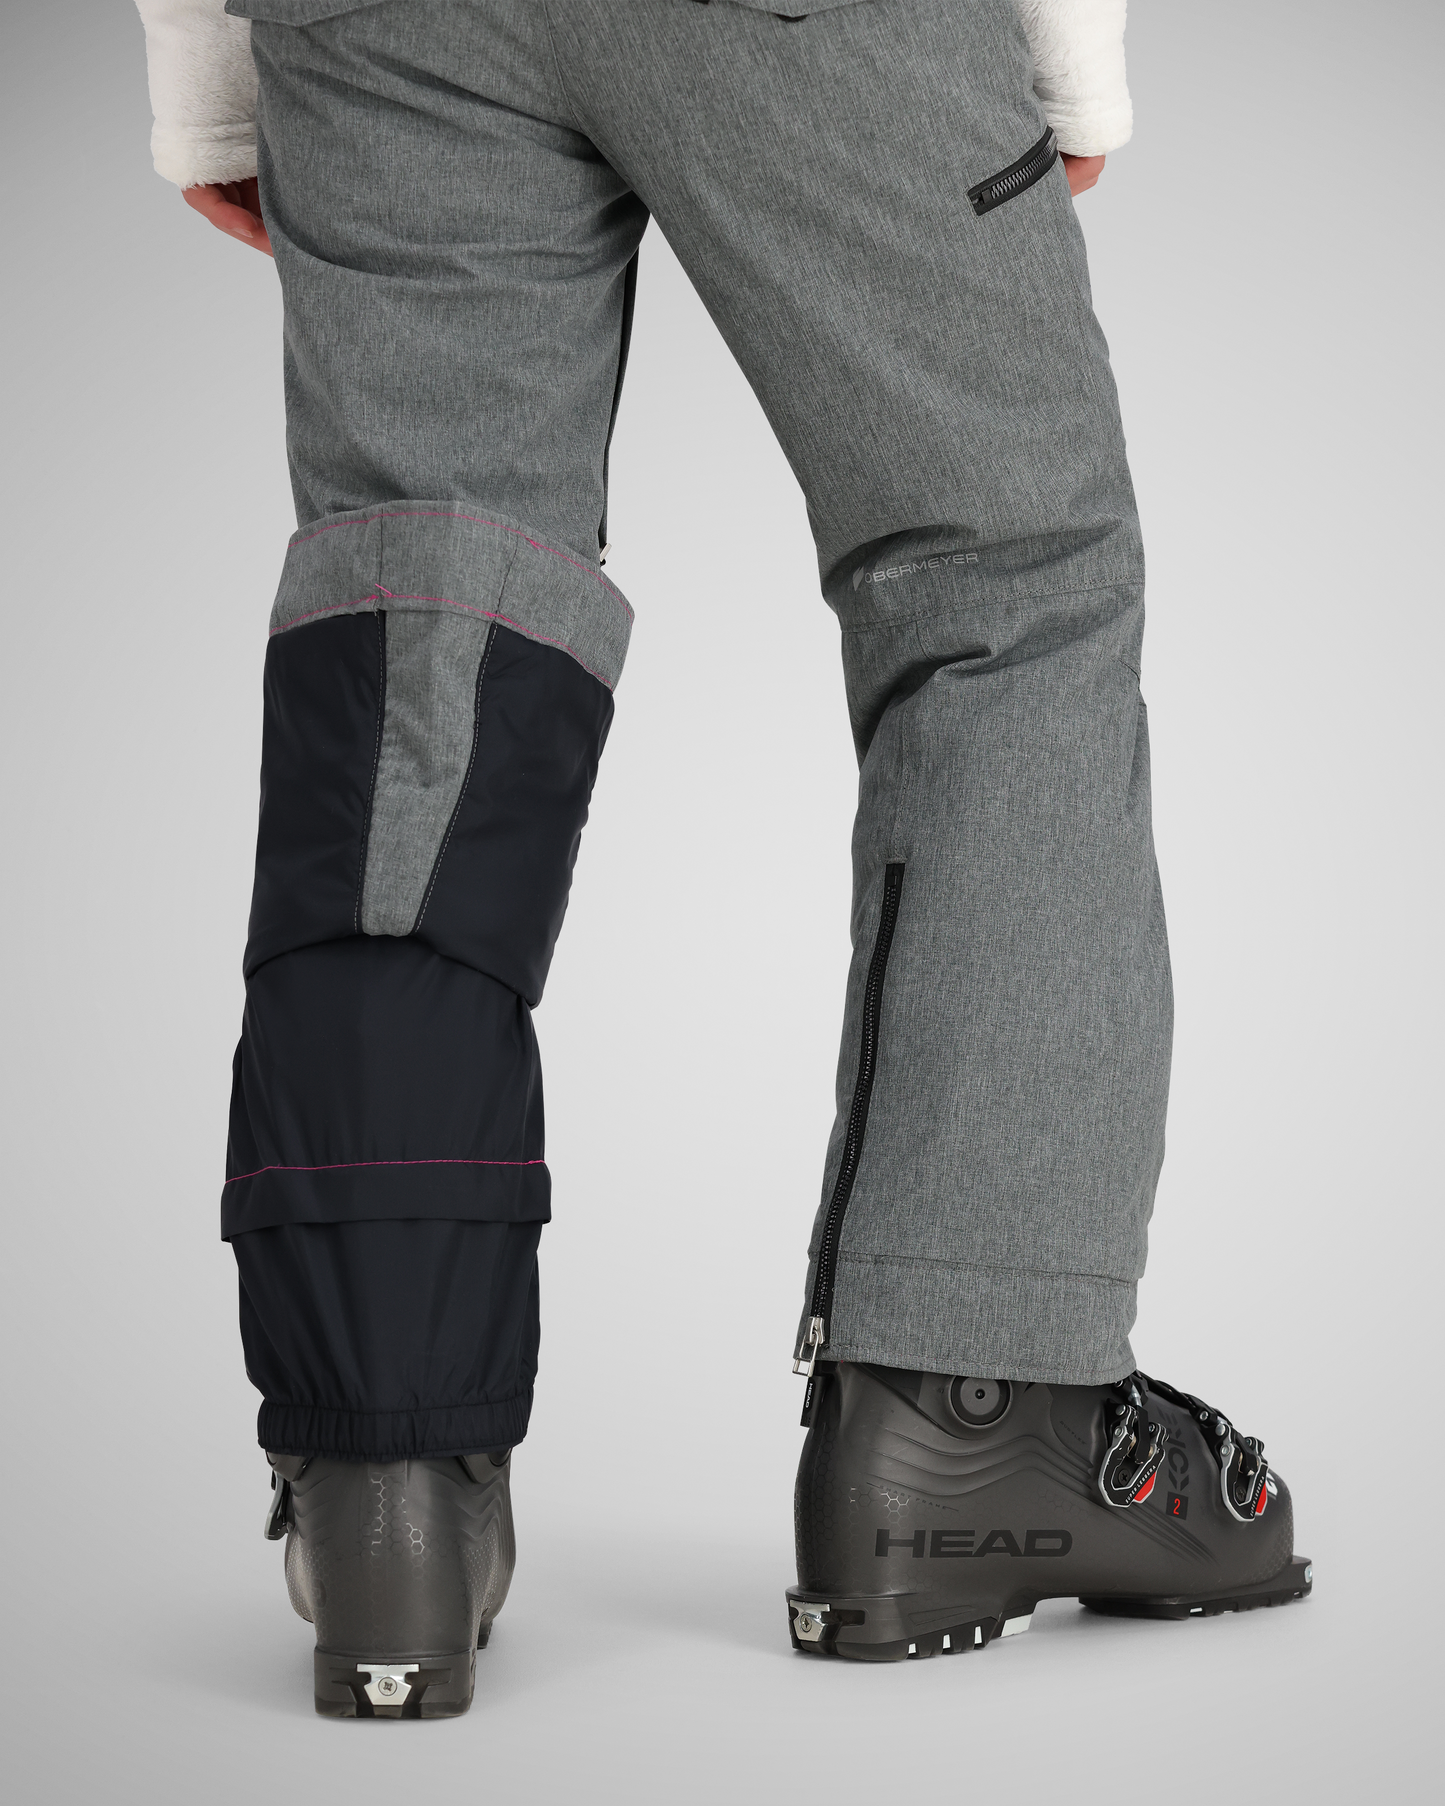 Water-resistant powder cuffs with gripper elastic | Protection from the elements was the prime goal of the design process of these cuffs. Boot gripping elastic ensures top-tier performance.